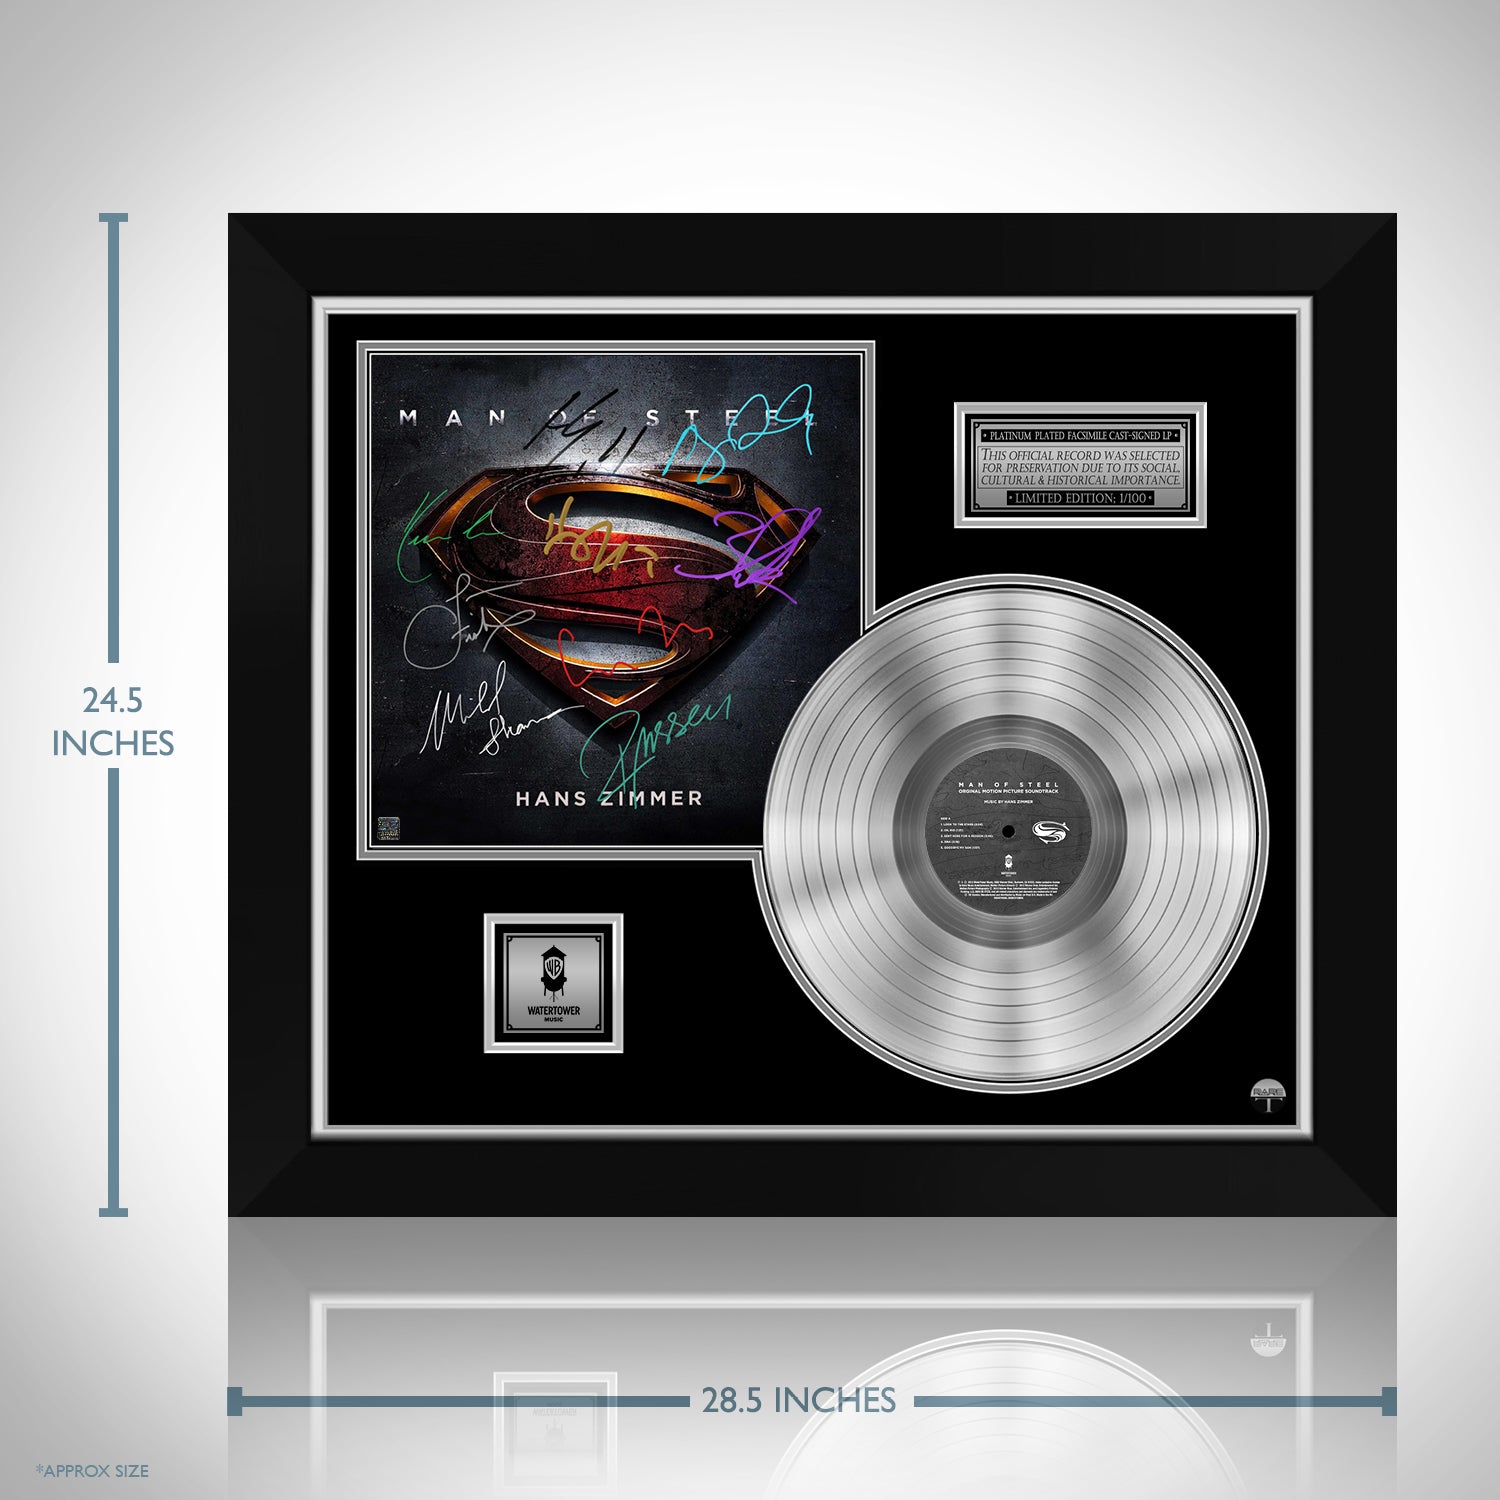 Music App Plays Man of Steel Soundtrack in Surround Sound - ETCentric